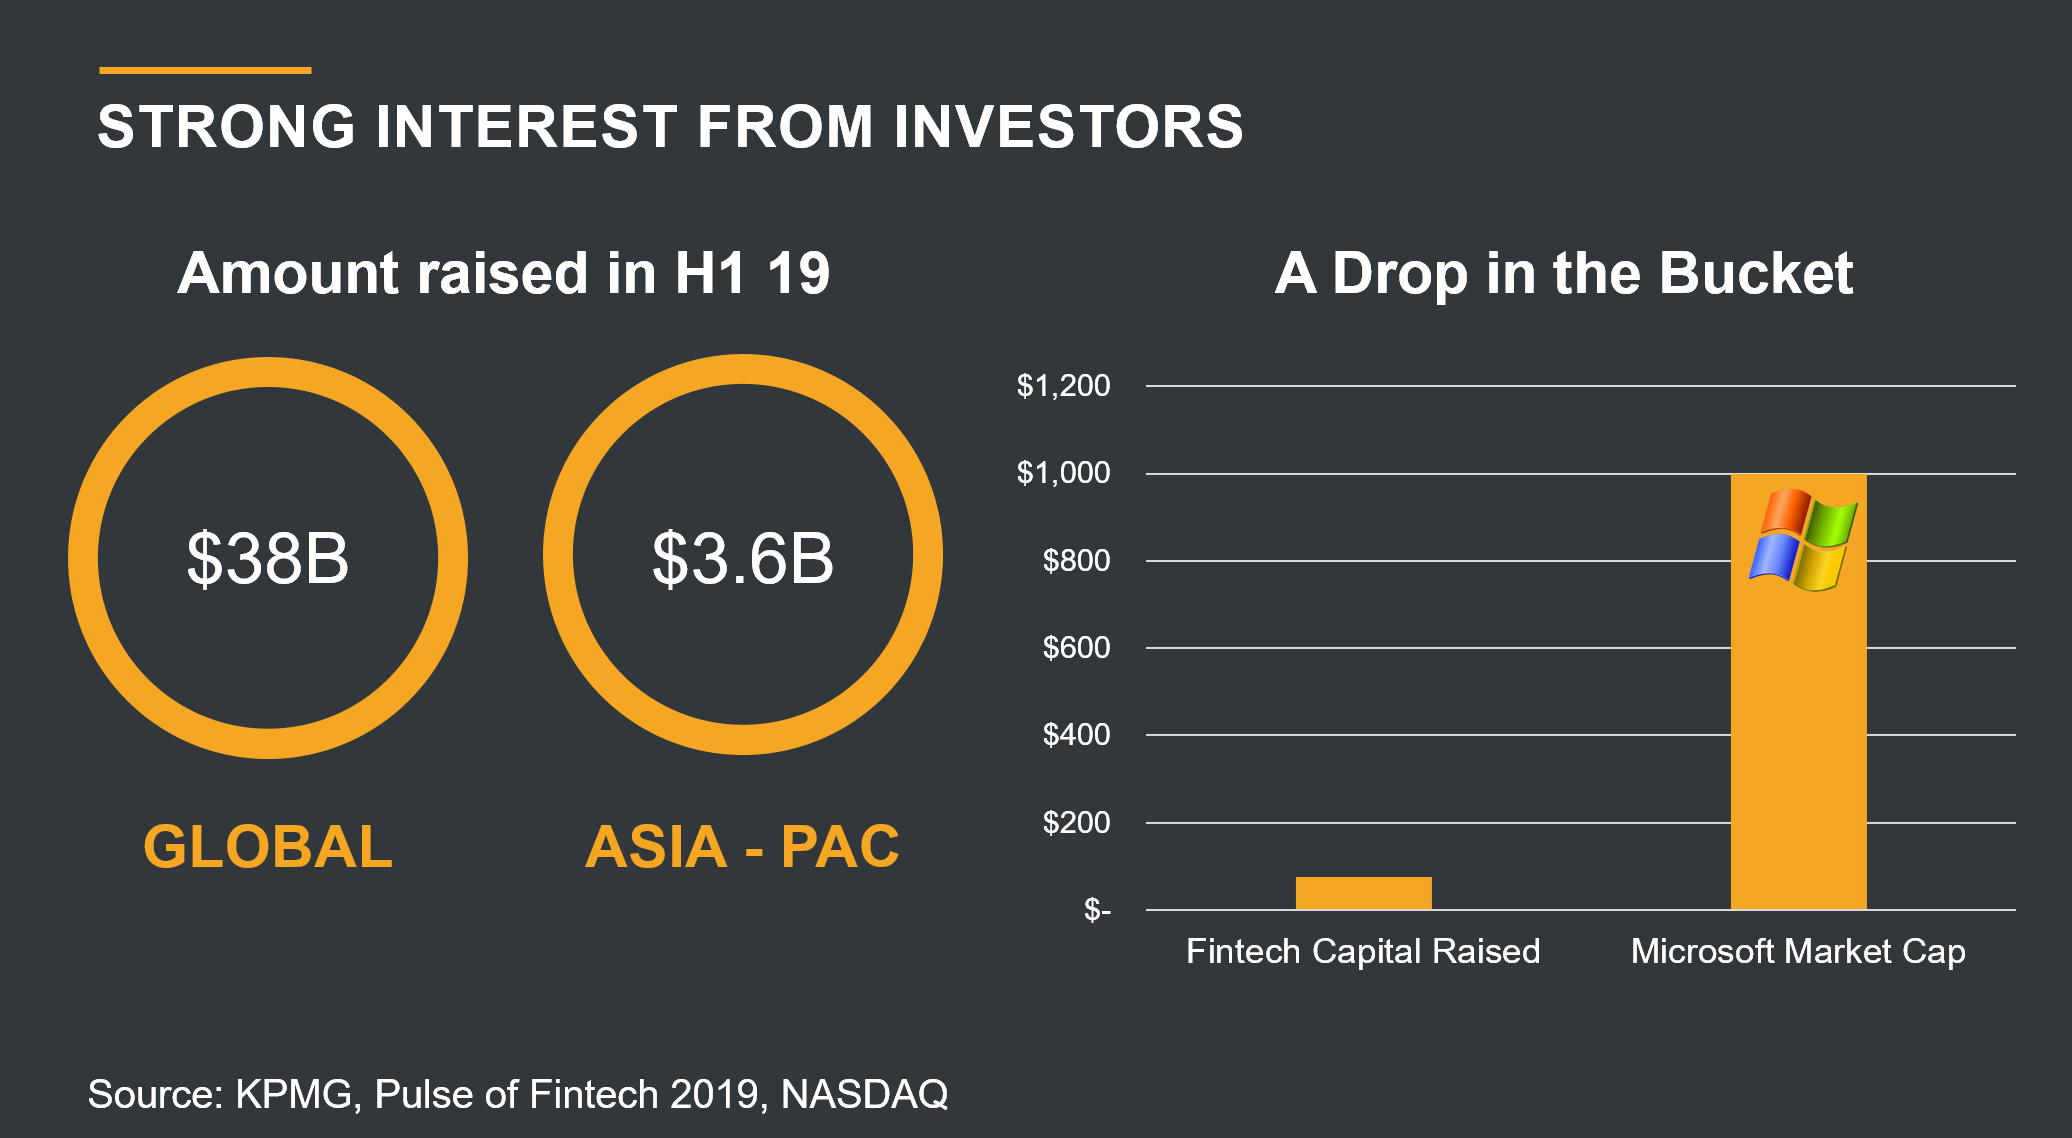 Investment in fintech